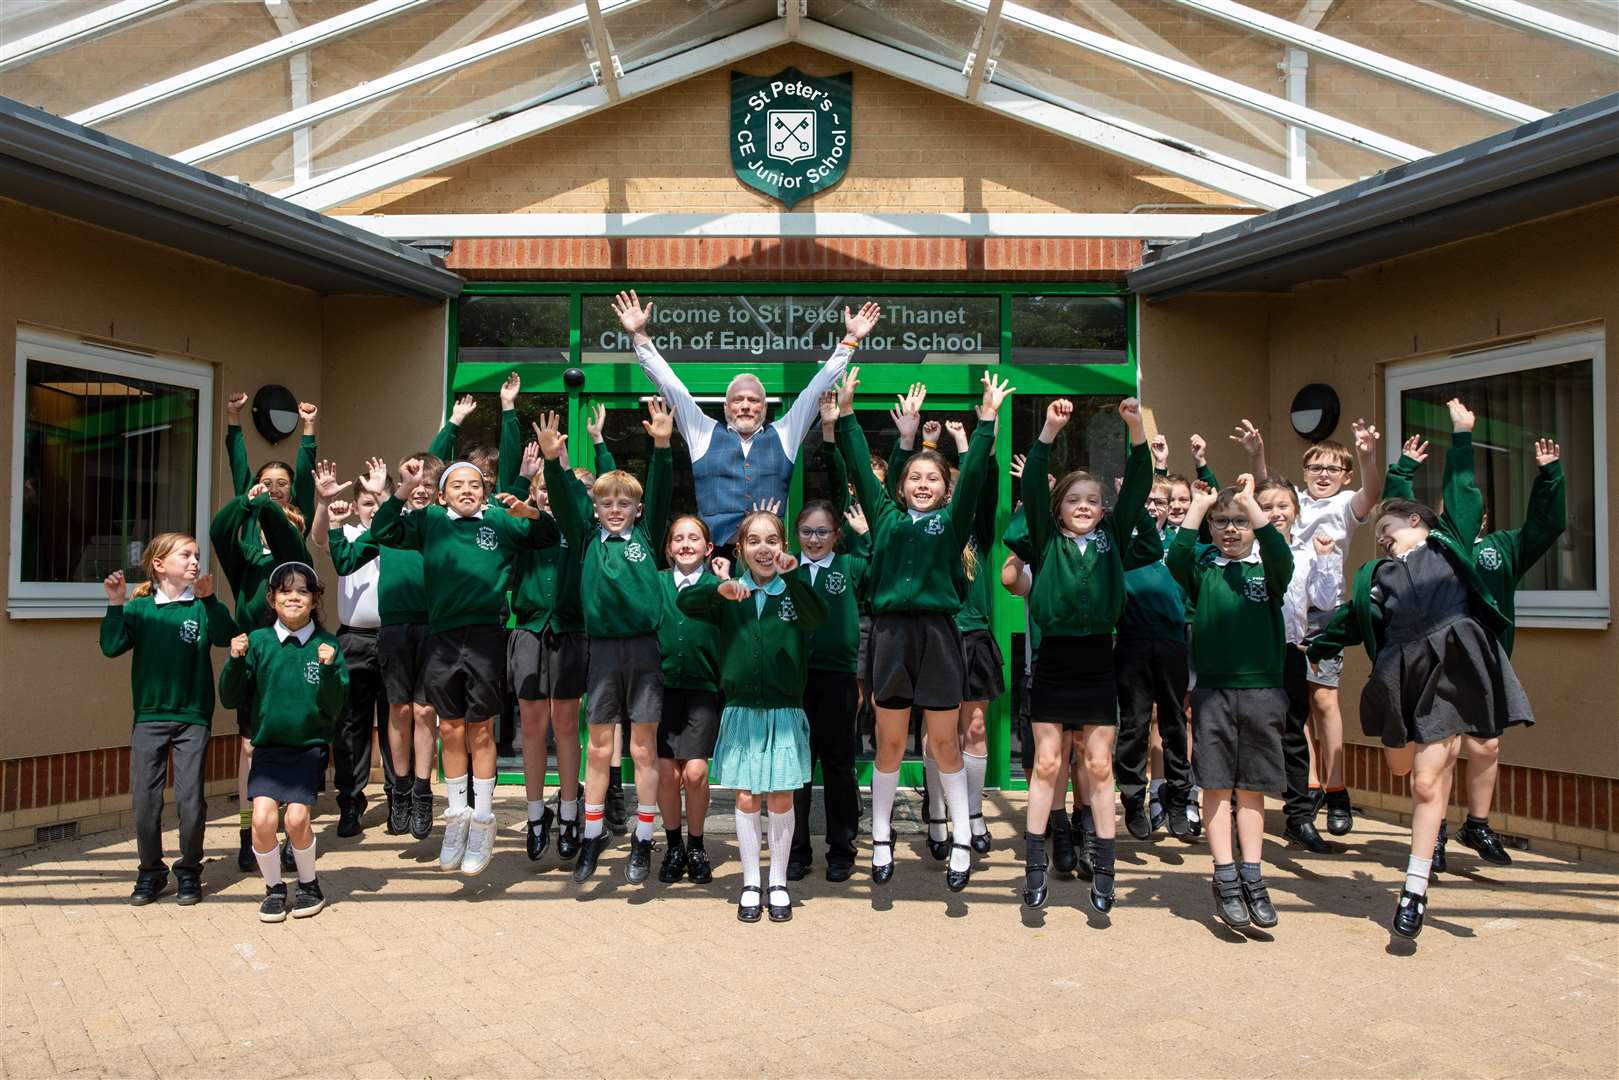 St Peter-in-Thanet C of E Junior School in Broadstairs has been given an 'outstanding' rating by Ofsted. Picture: St Peter's Junior School